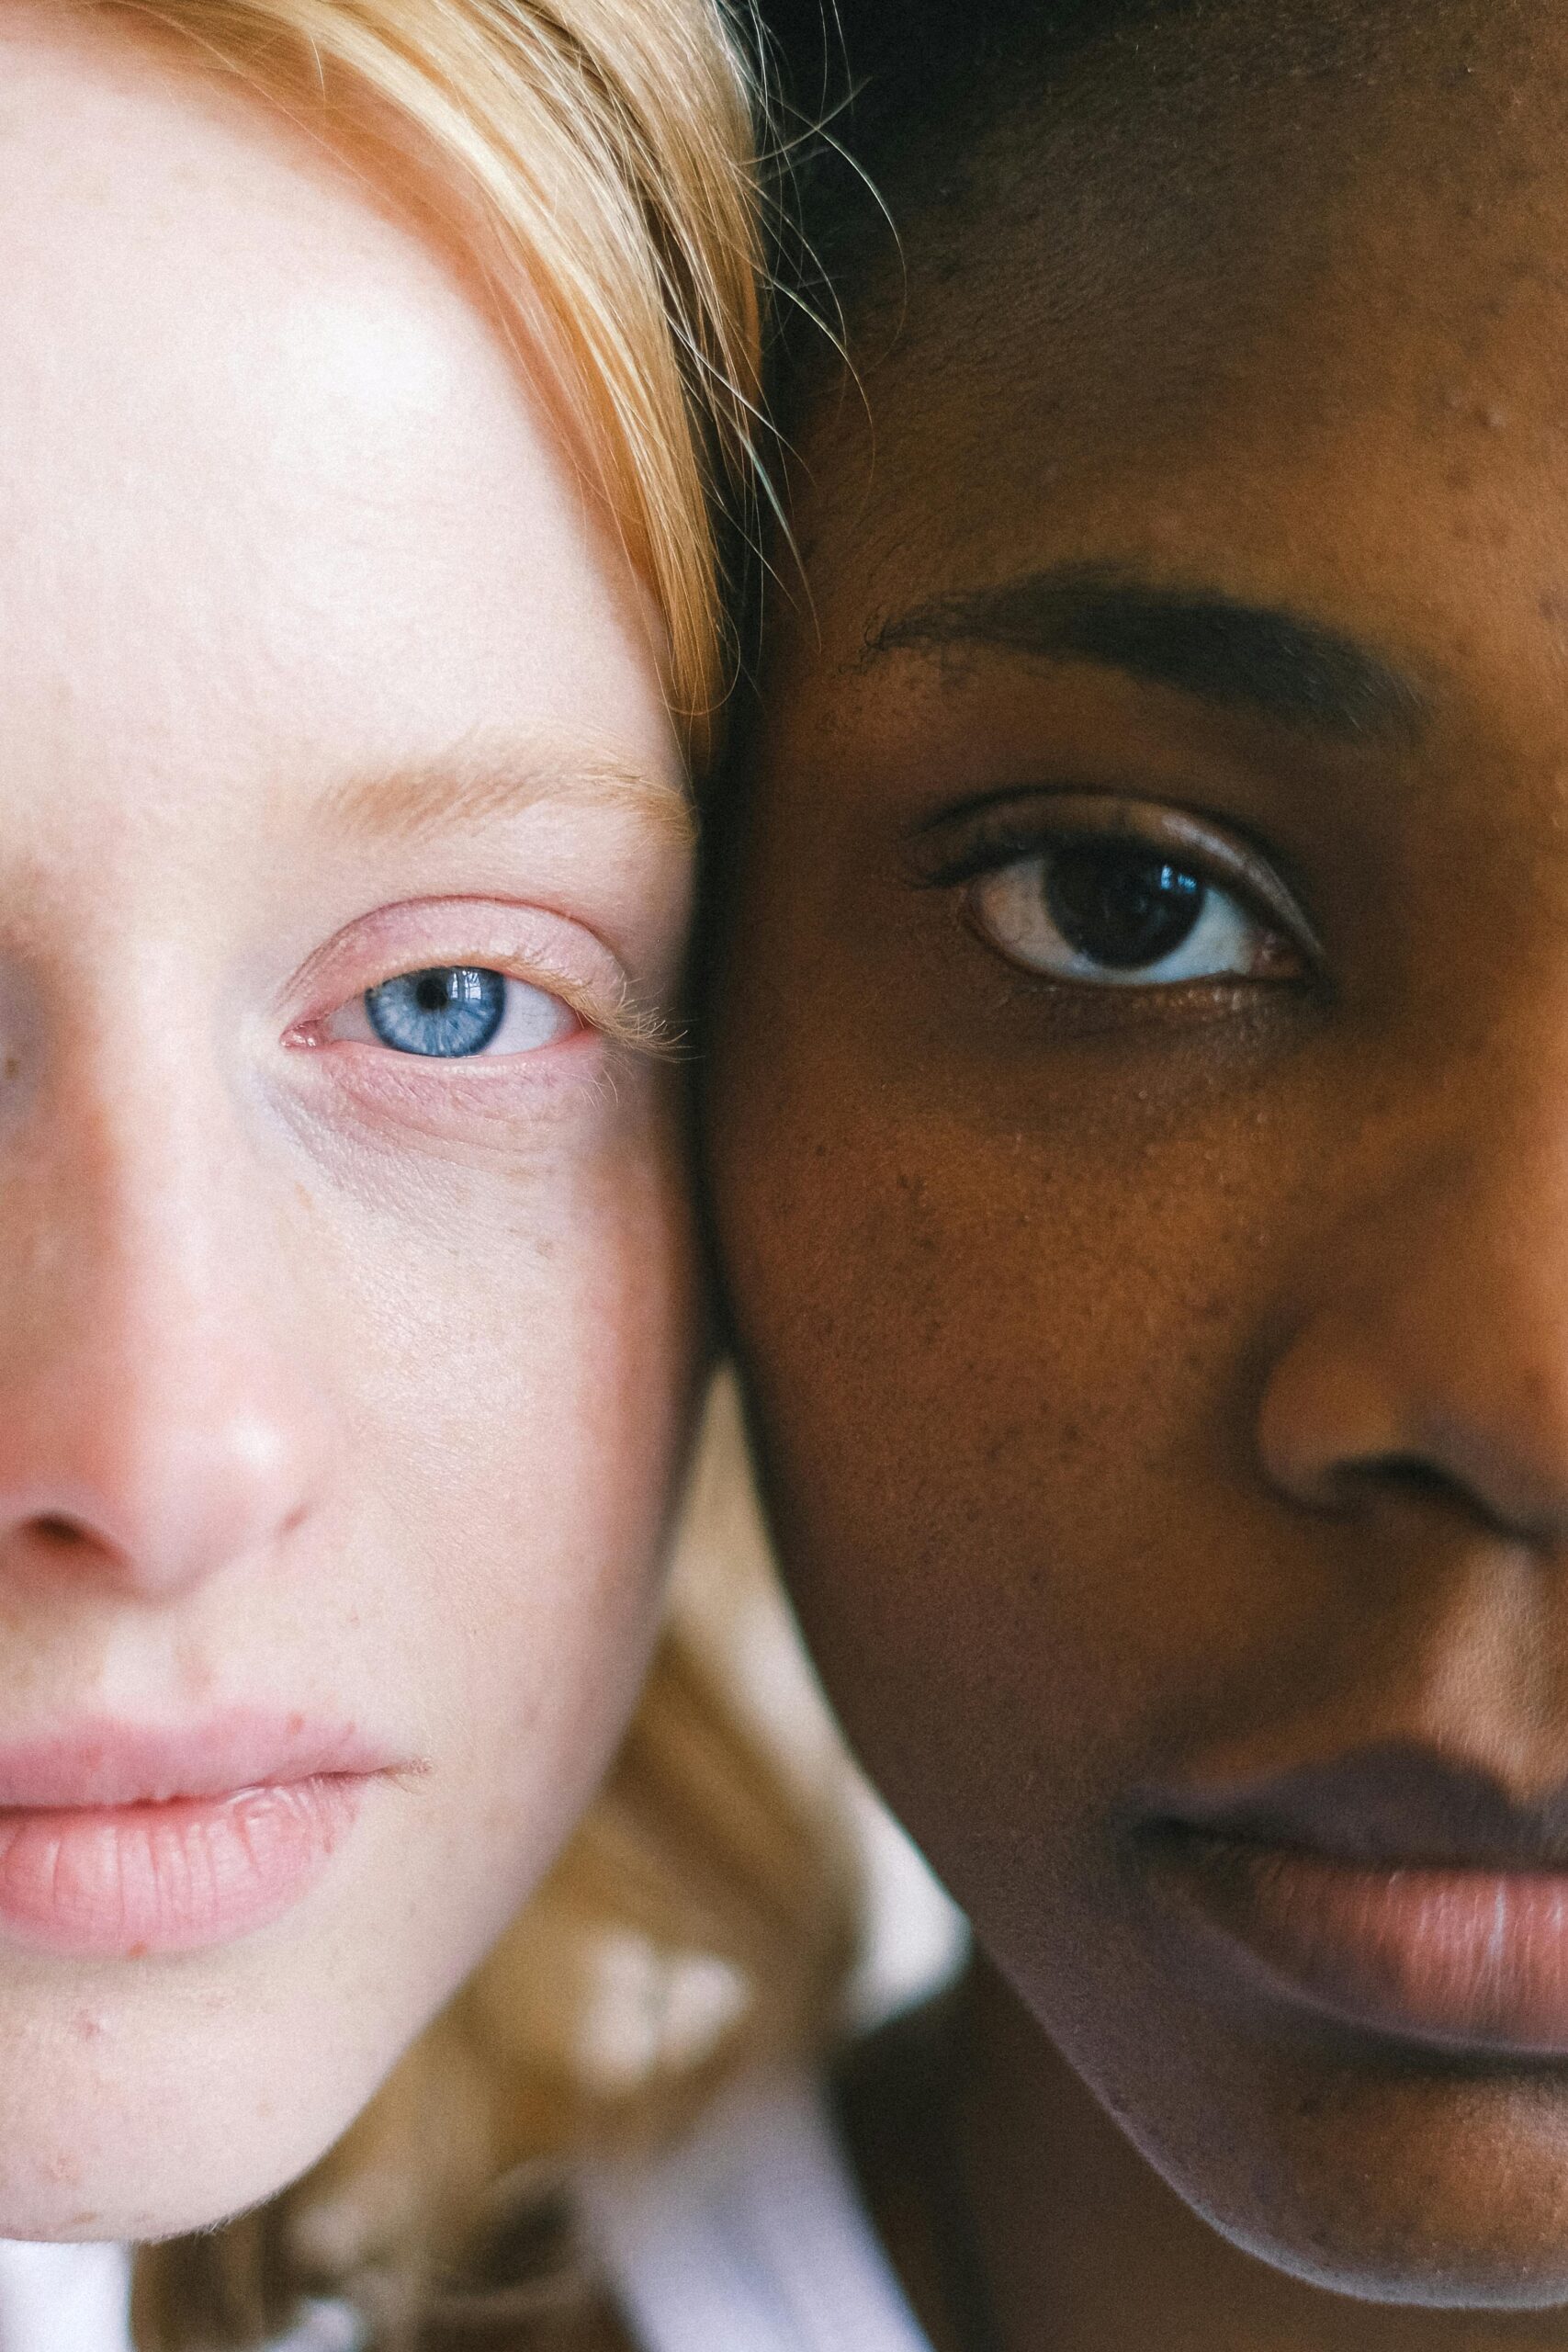 An image showing people with diverse skin tones, symbolizing the beauty and diversity of skin color.